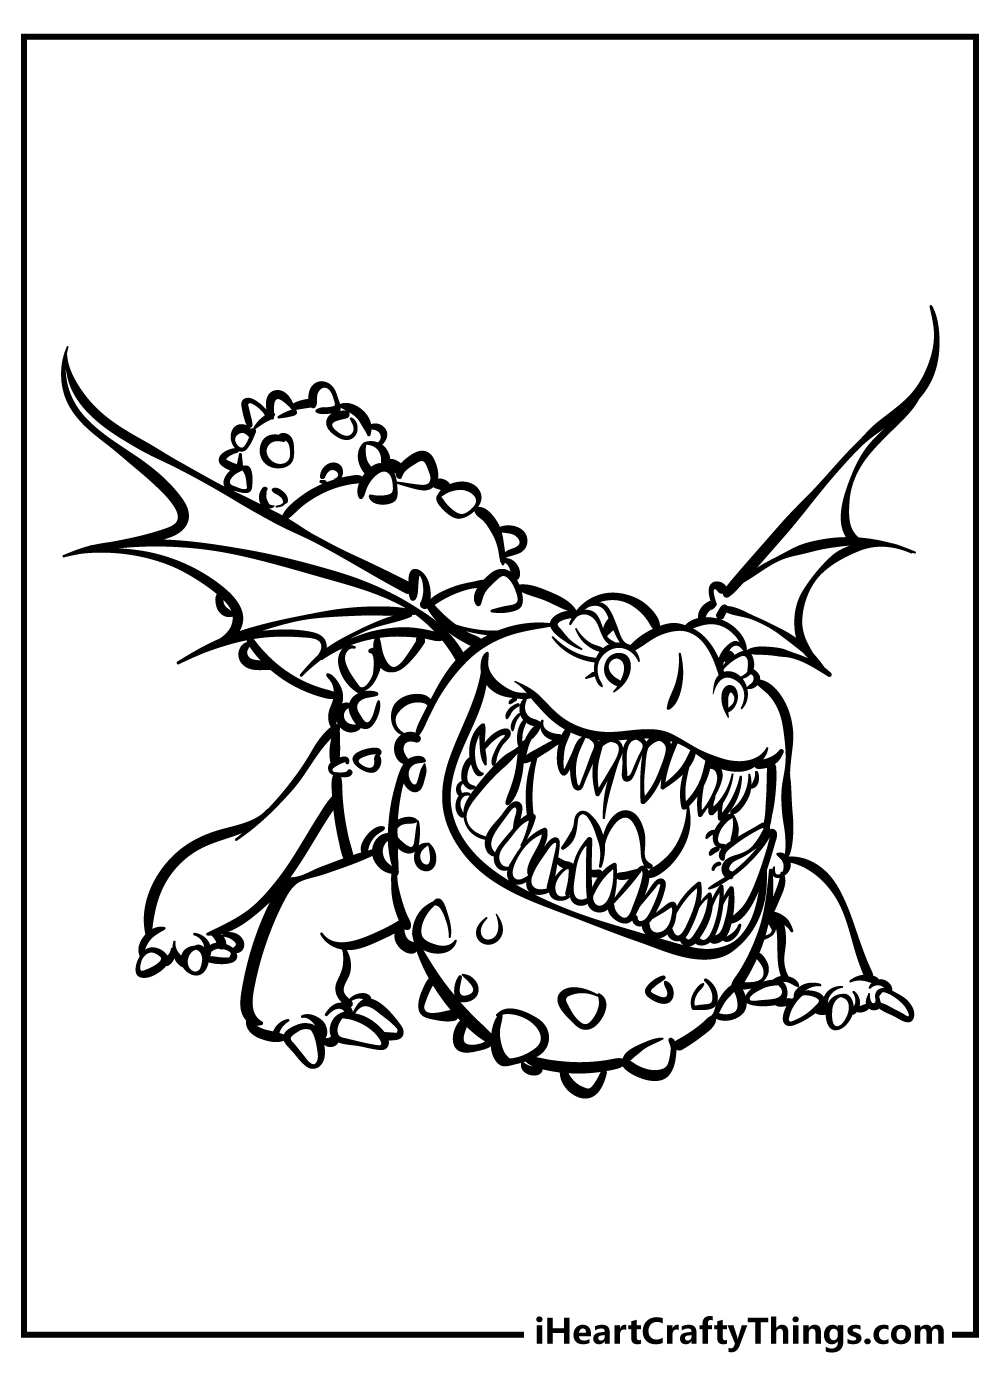 How To Train Your Dragon Coloring Book for kids free printable